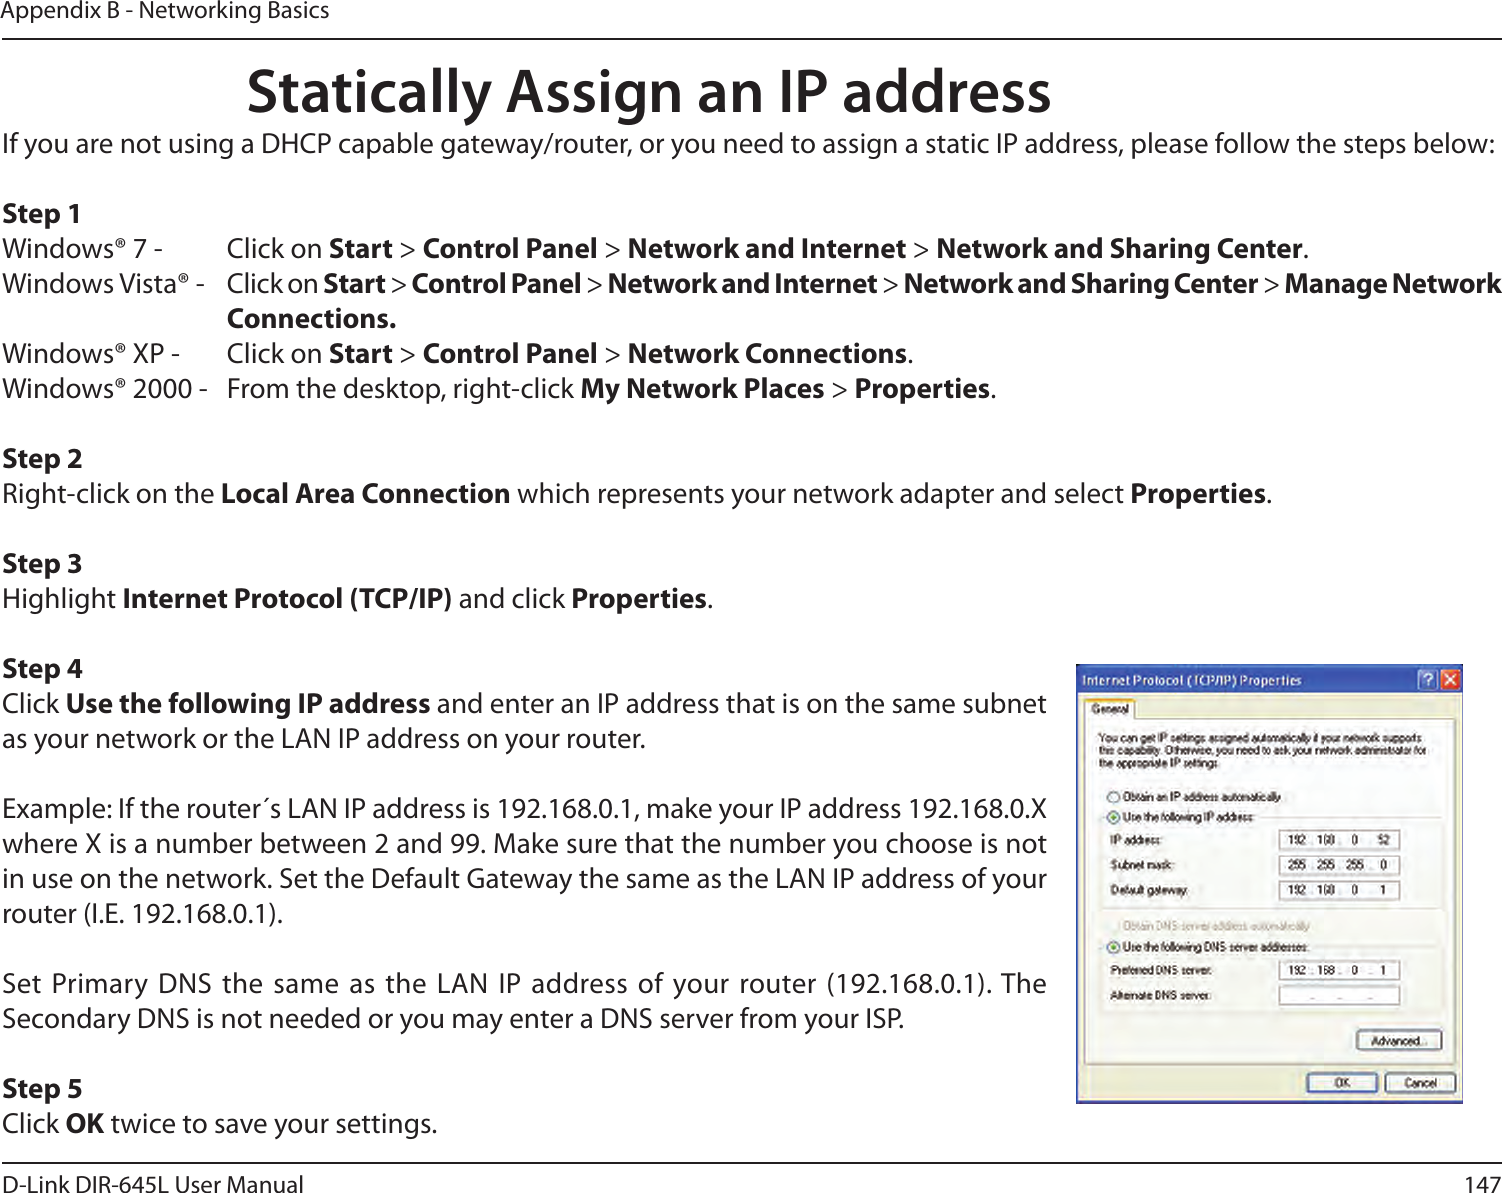 147D-Link DIR-645L User ManualAppendix B - Networking BasicsStatically Assign an IP addressIf you are not using a DHCP capable gateway/router, or you need to assign a static IP address, please follow the steps below:Step 1Windows® 7 -  Click on Start &gt; Control Panel &gt; Network and Internet &gt; Network and Sharing Center.Windows Vista® -  Click on Start &gt; Control Panel &gt; Network and Internet &gt; Network and Sharing Center &gt; Manage Network      Connections.Windows® XP -  Click on Start &gt; Control Panel &gt; Network Connections.Windows® 2000 -  From the desktop, right-click My Network Places &gt; Properties.Step 2Right-click on the Local Area Connection which represents your network adapter and select Properties.Step 3Highlight Internet Protocol (TCP/IP) and click Properties.Step 4Click Use the following IP address and enter an IP address that is on the same subnet as your network or the LAN IP address on your router. Example: If the router´s LAN IP address is 192.168.0.1, make your IP address 192.168.0.X where X is a number between 2 and 99. Make sure that the number you choose is not in use on the network. Set the Default Gateway the same as the LAN IP address of your router (I.E. 192.168.0.1). Set Primary DNS the same as the LAN  IP  address of your router (192.168.0.1). The Secondary DNS is not needed or you may enter a DNS server from your ISP.Step 5Click OK twice to save your settings.